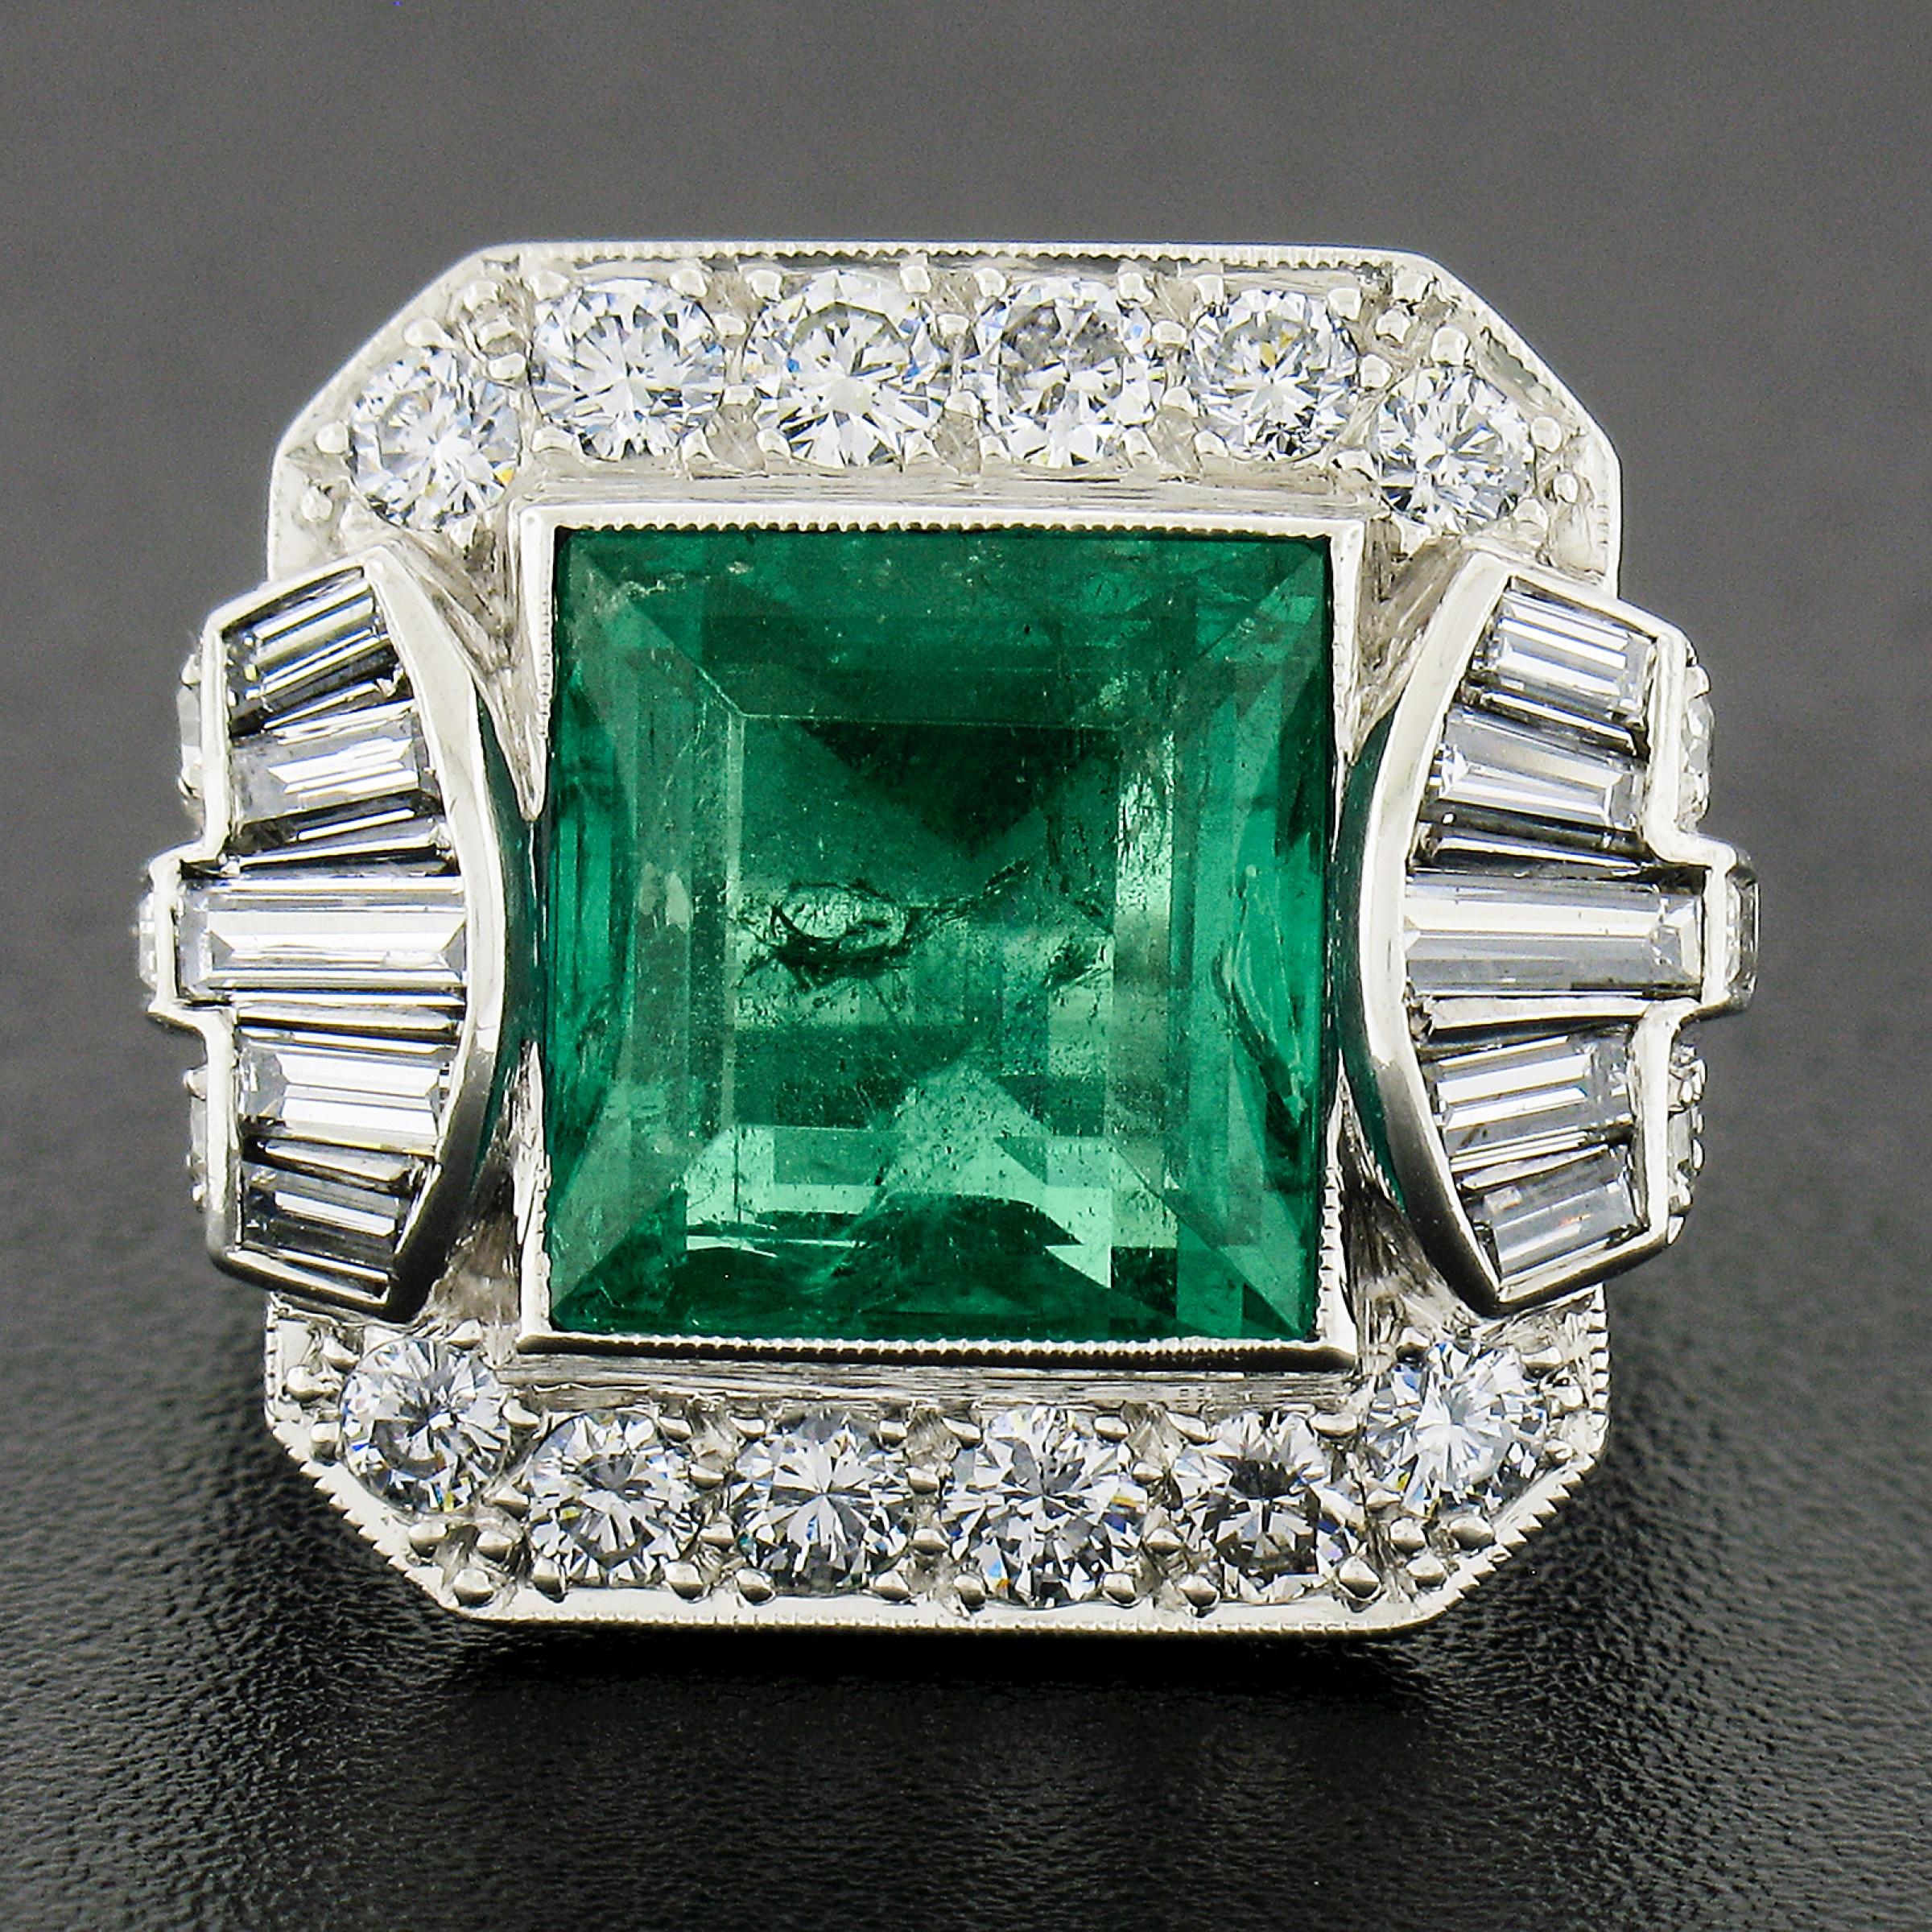 This breathtaking vintage emerald and diamond cocktail ring features a large, GIA certified, natural square step cut Colombian emerald neatly bezel set at the center, showing the most mesmerizing rich green color throughout. The emerald is graded by